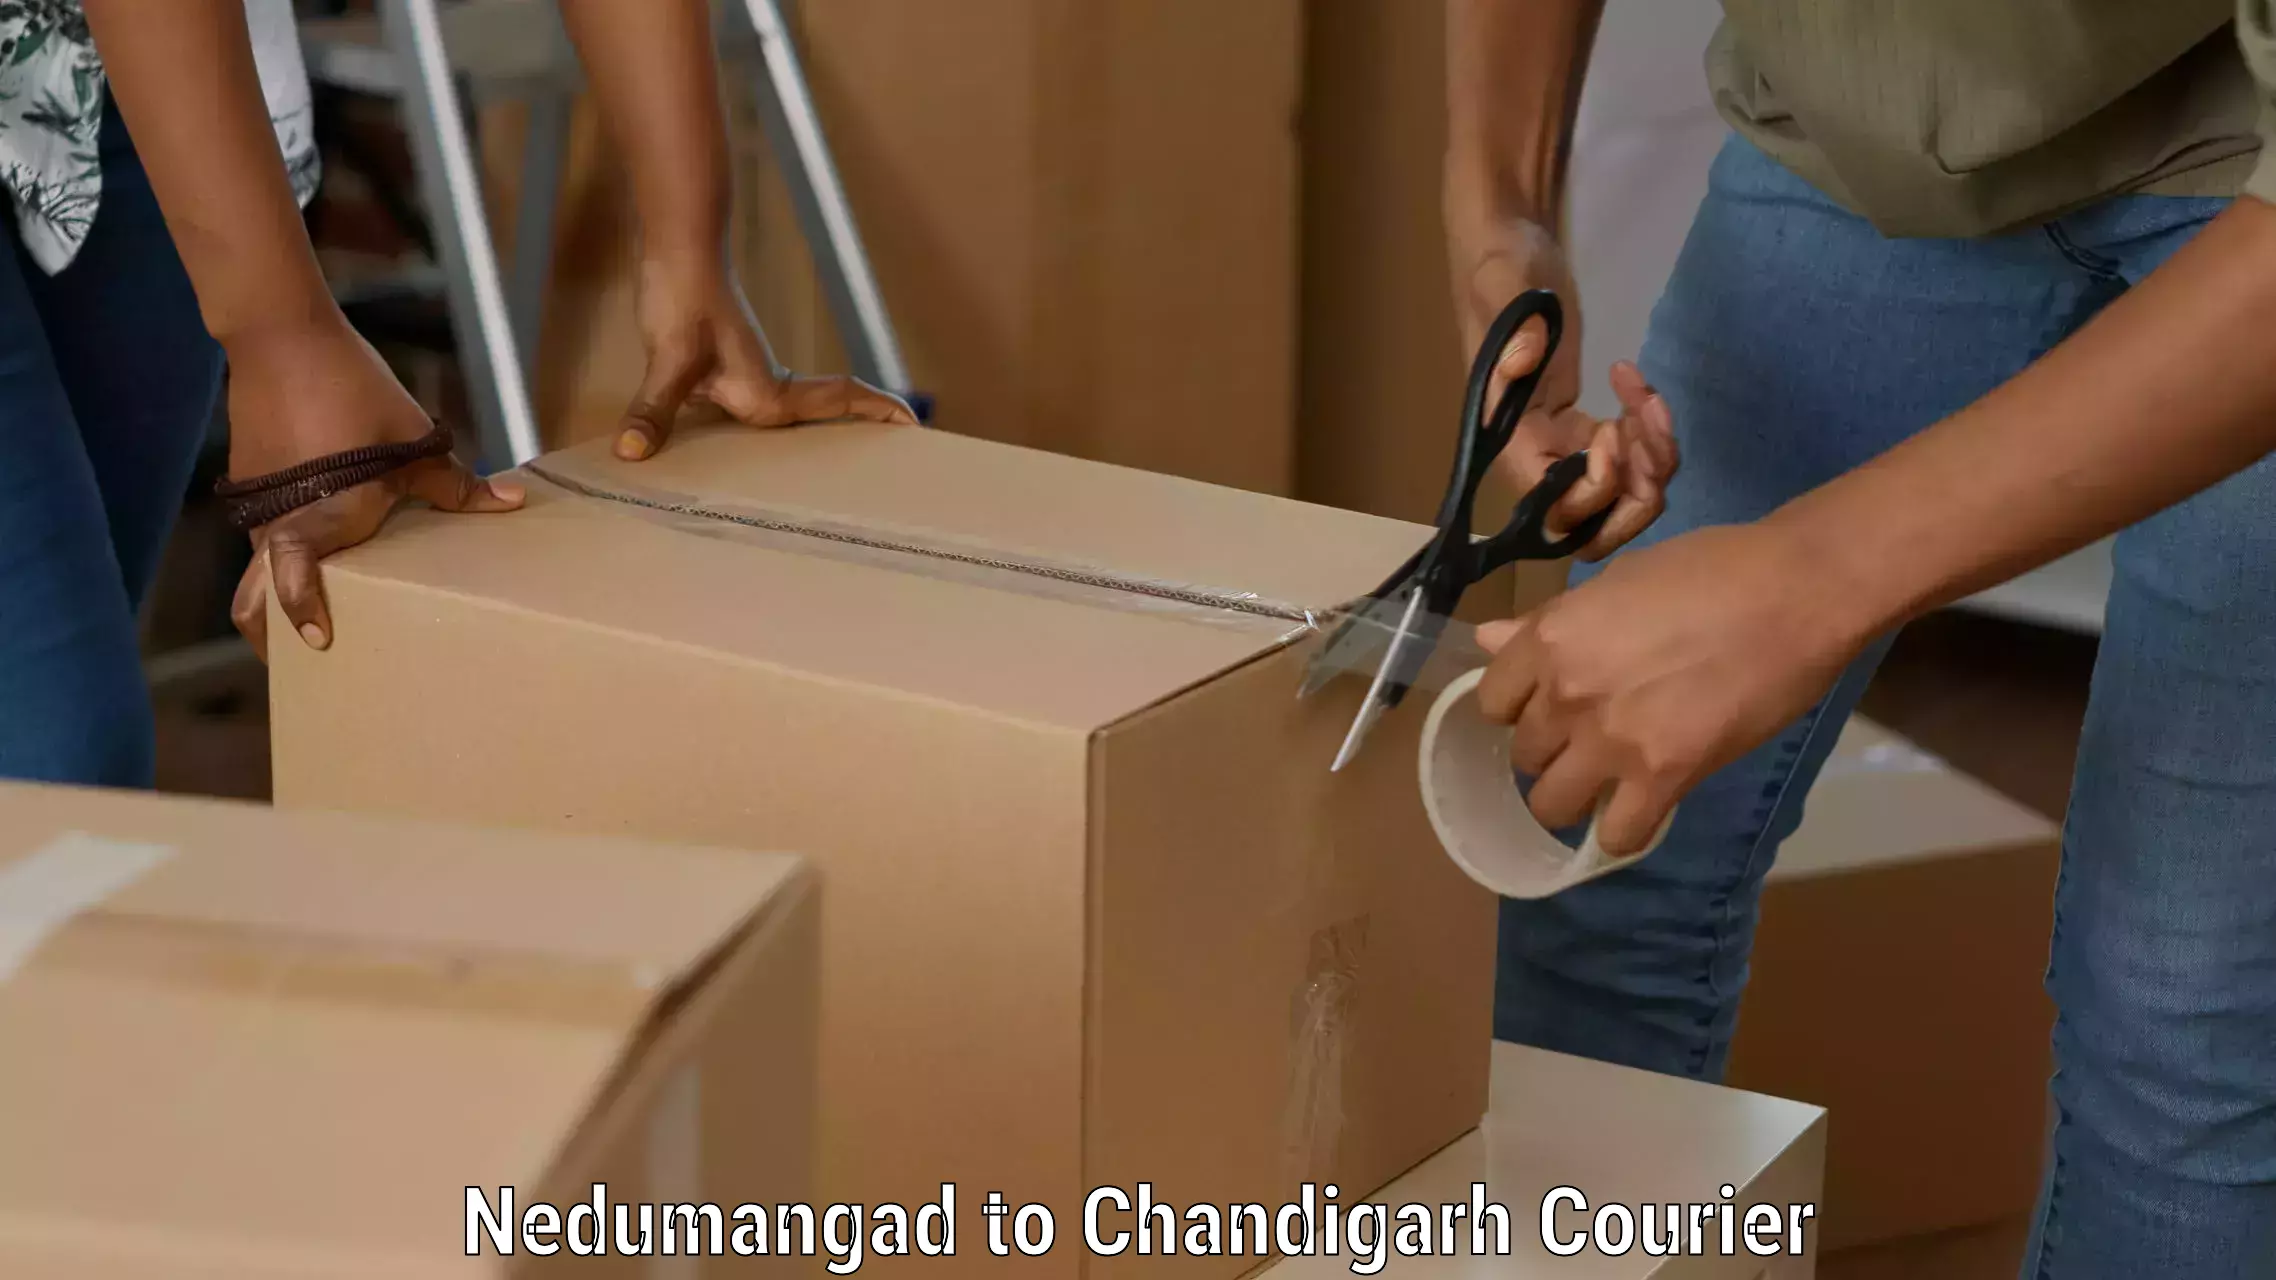 Package delivery network Nedumangad to Chandigarh